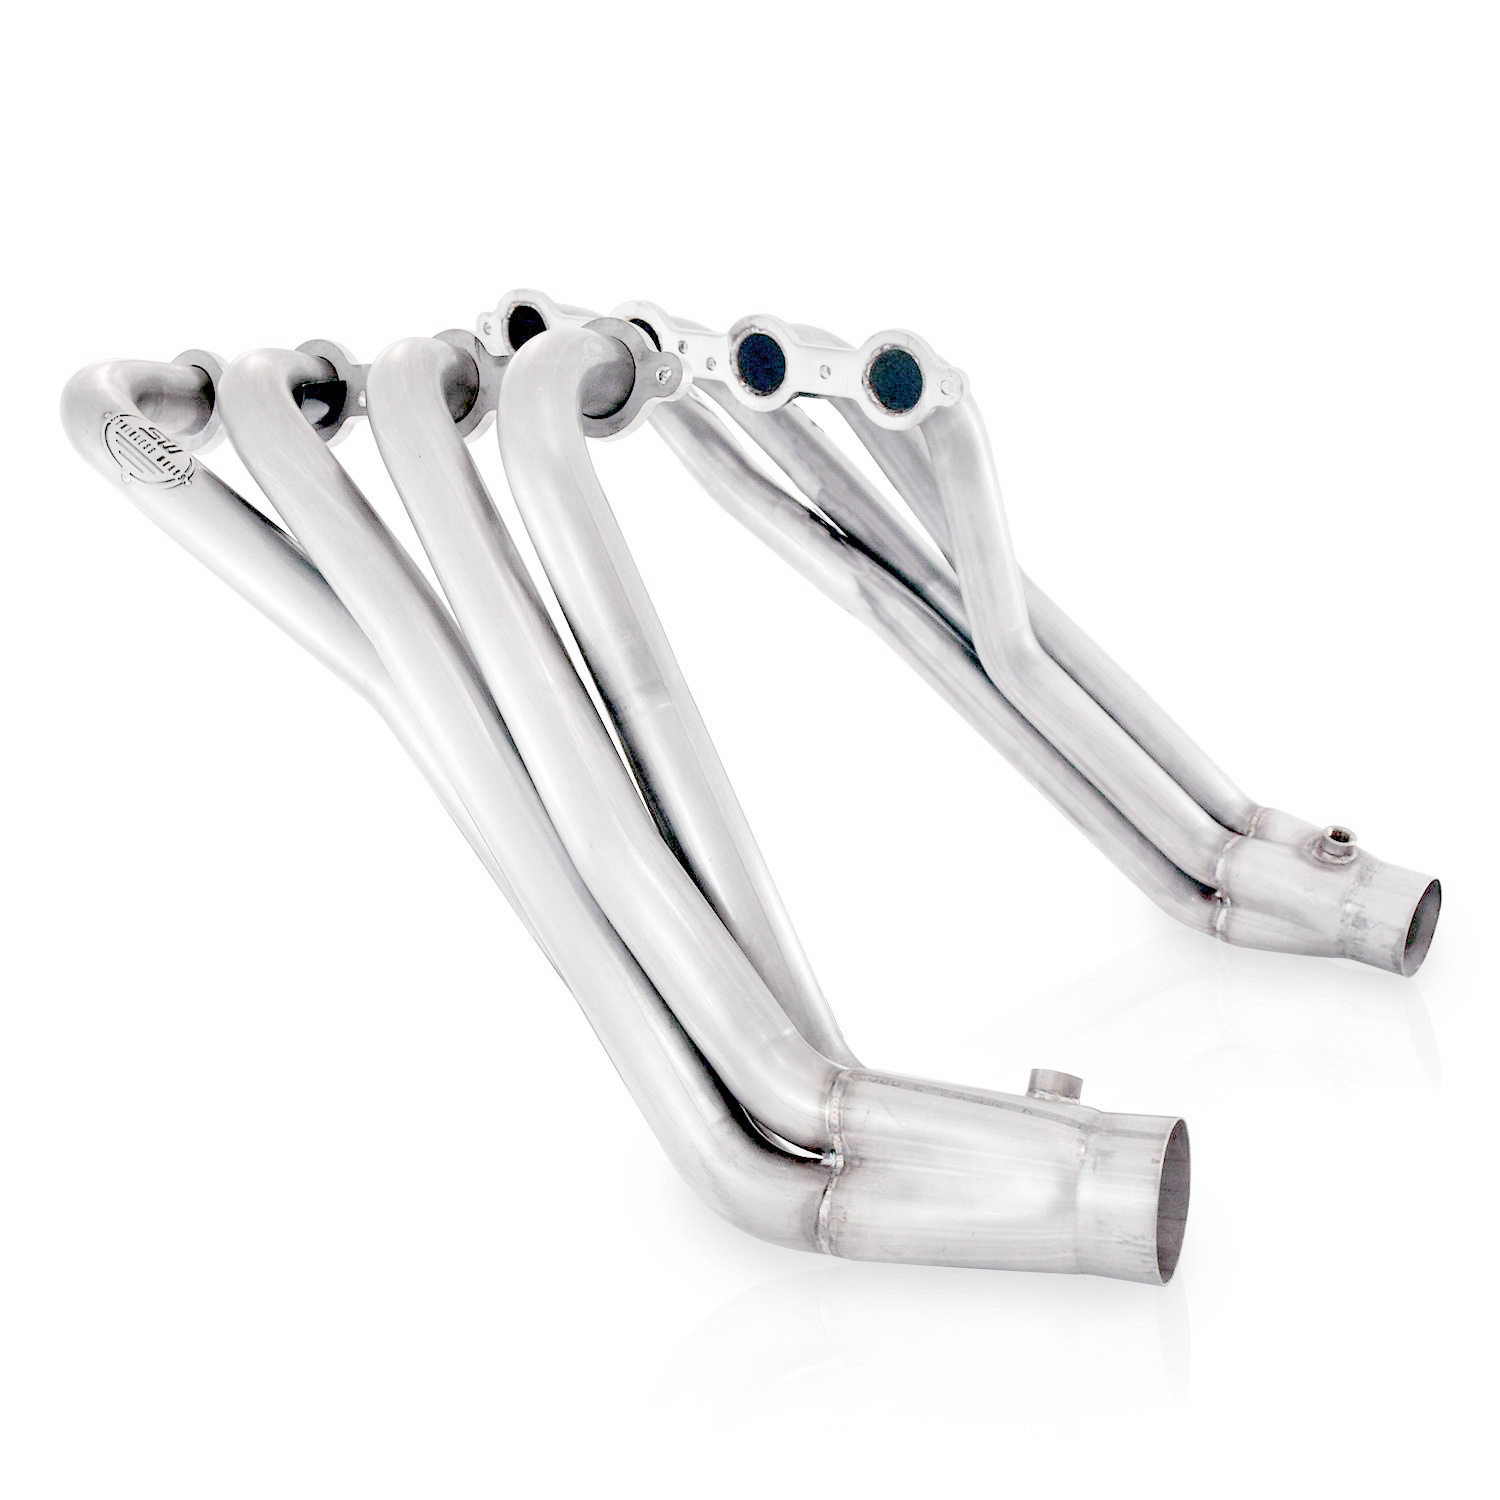 2004-2007 Cadillac CTS-V Sedan LS2/LS6 5.7L, 6.0L SW Headers Only 1-7/8" Performance Connect